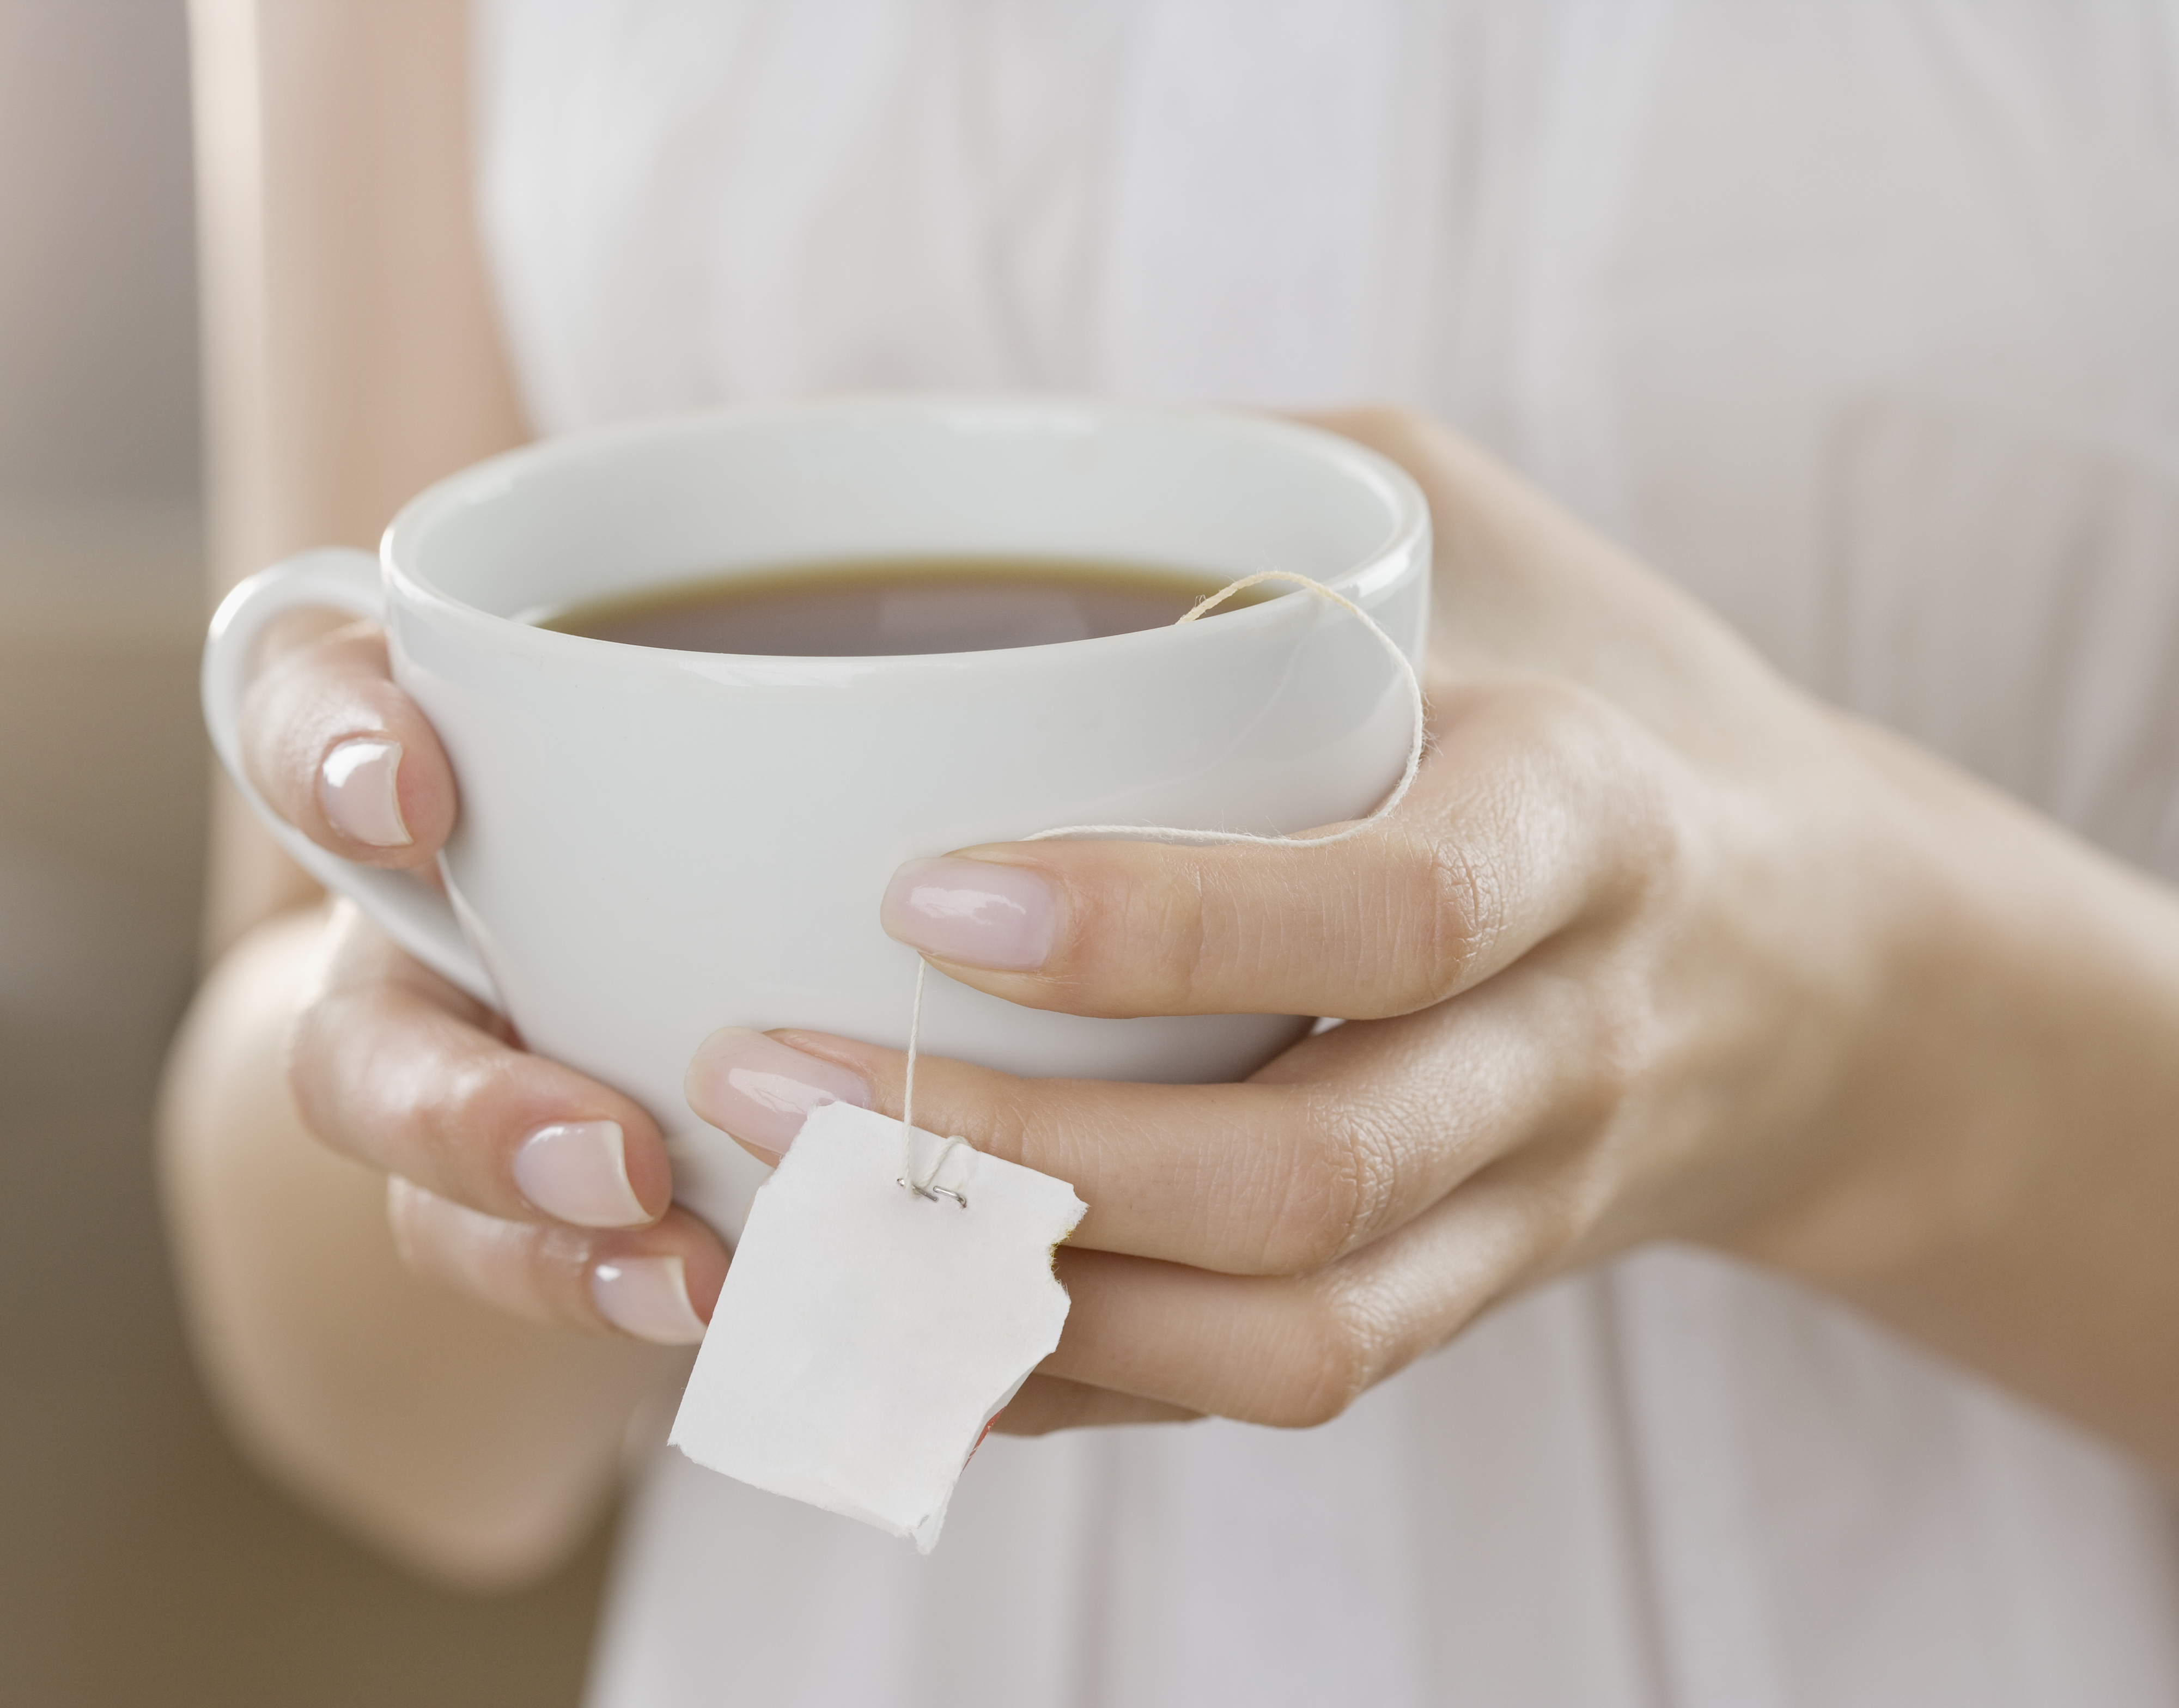 A person holding a cup of tea with a tea bag